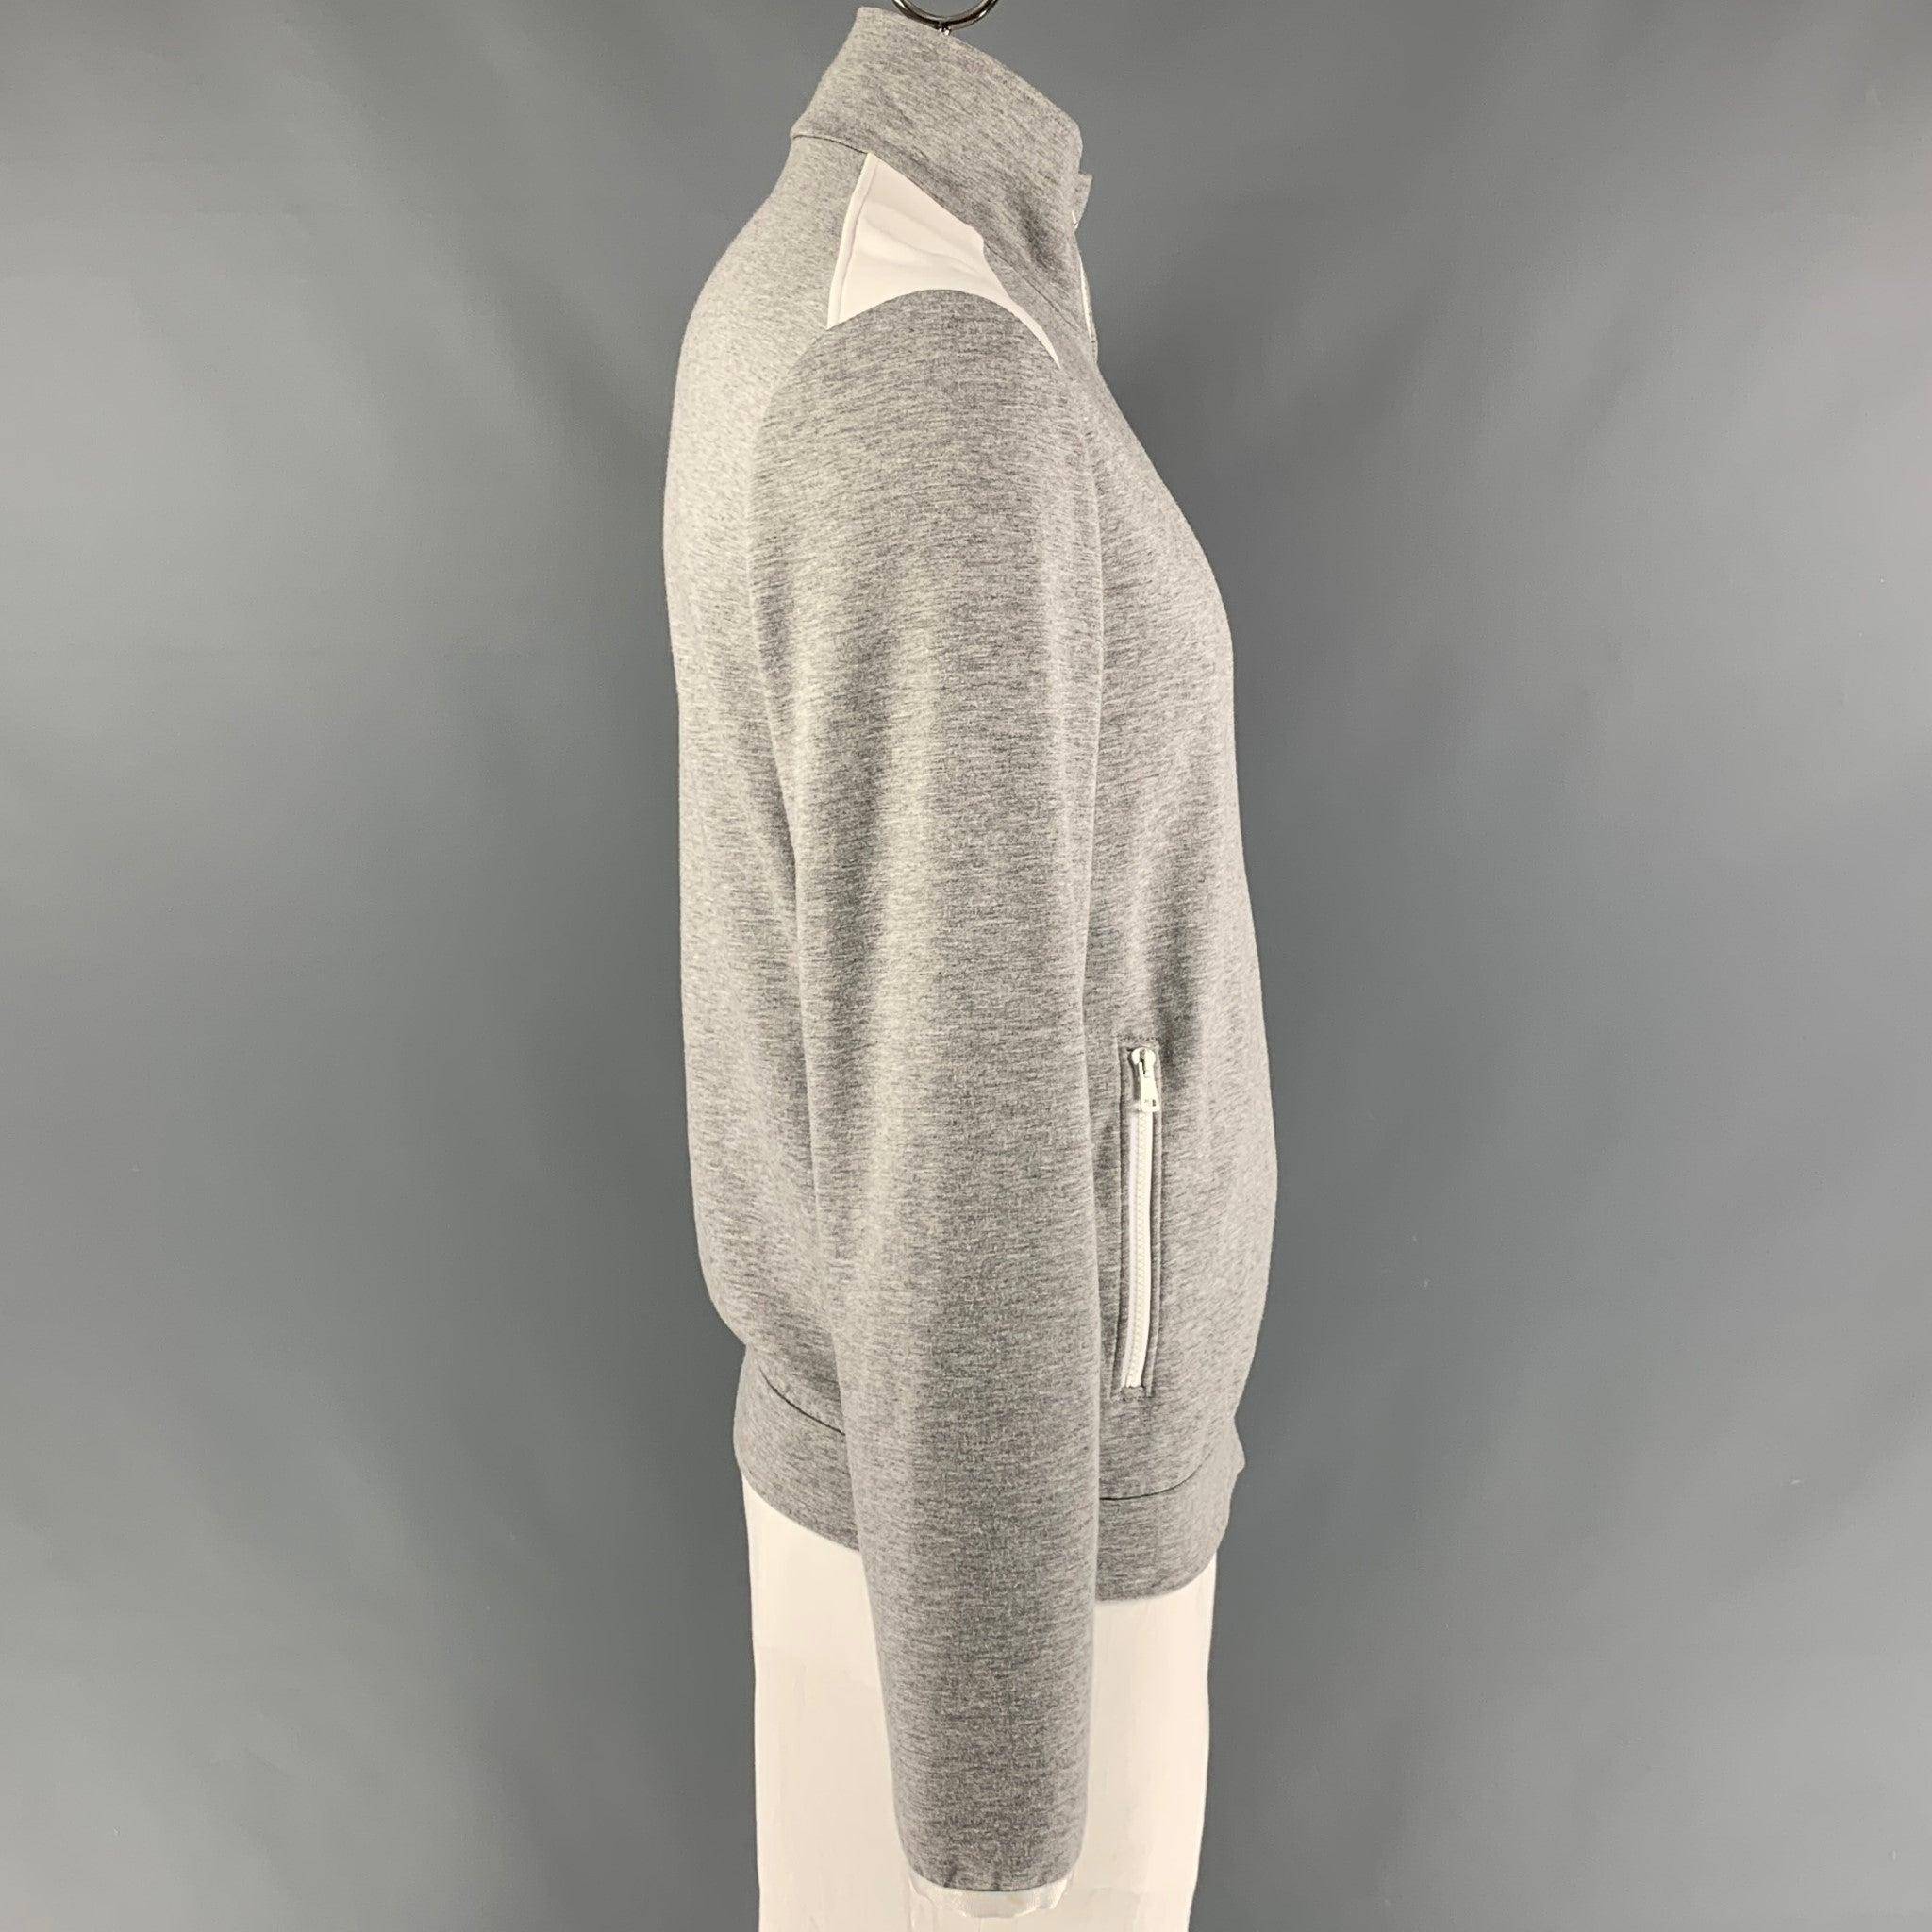 GUCCI sweatshirt comes in heather grey and white color block viscose blend featuring a high collar, zipper pocket, and a zip up closure. Made in Italy. Excellent Pre-Owned Condition. 

Marked:   XL 

Measurements: 
 
Shoulder: 20.5 inches Chest: 45